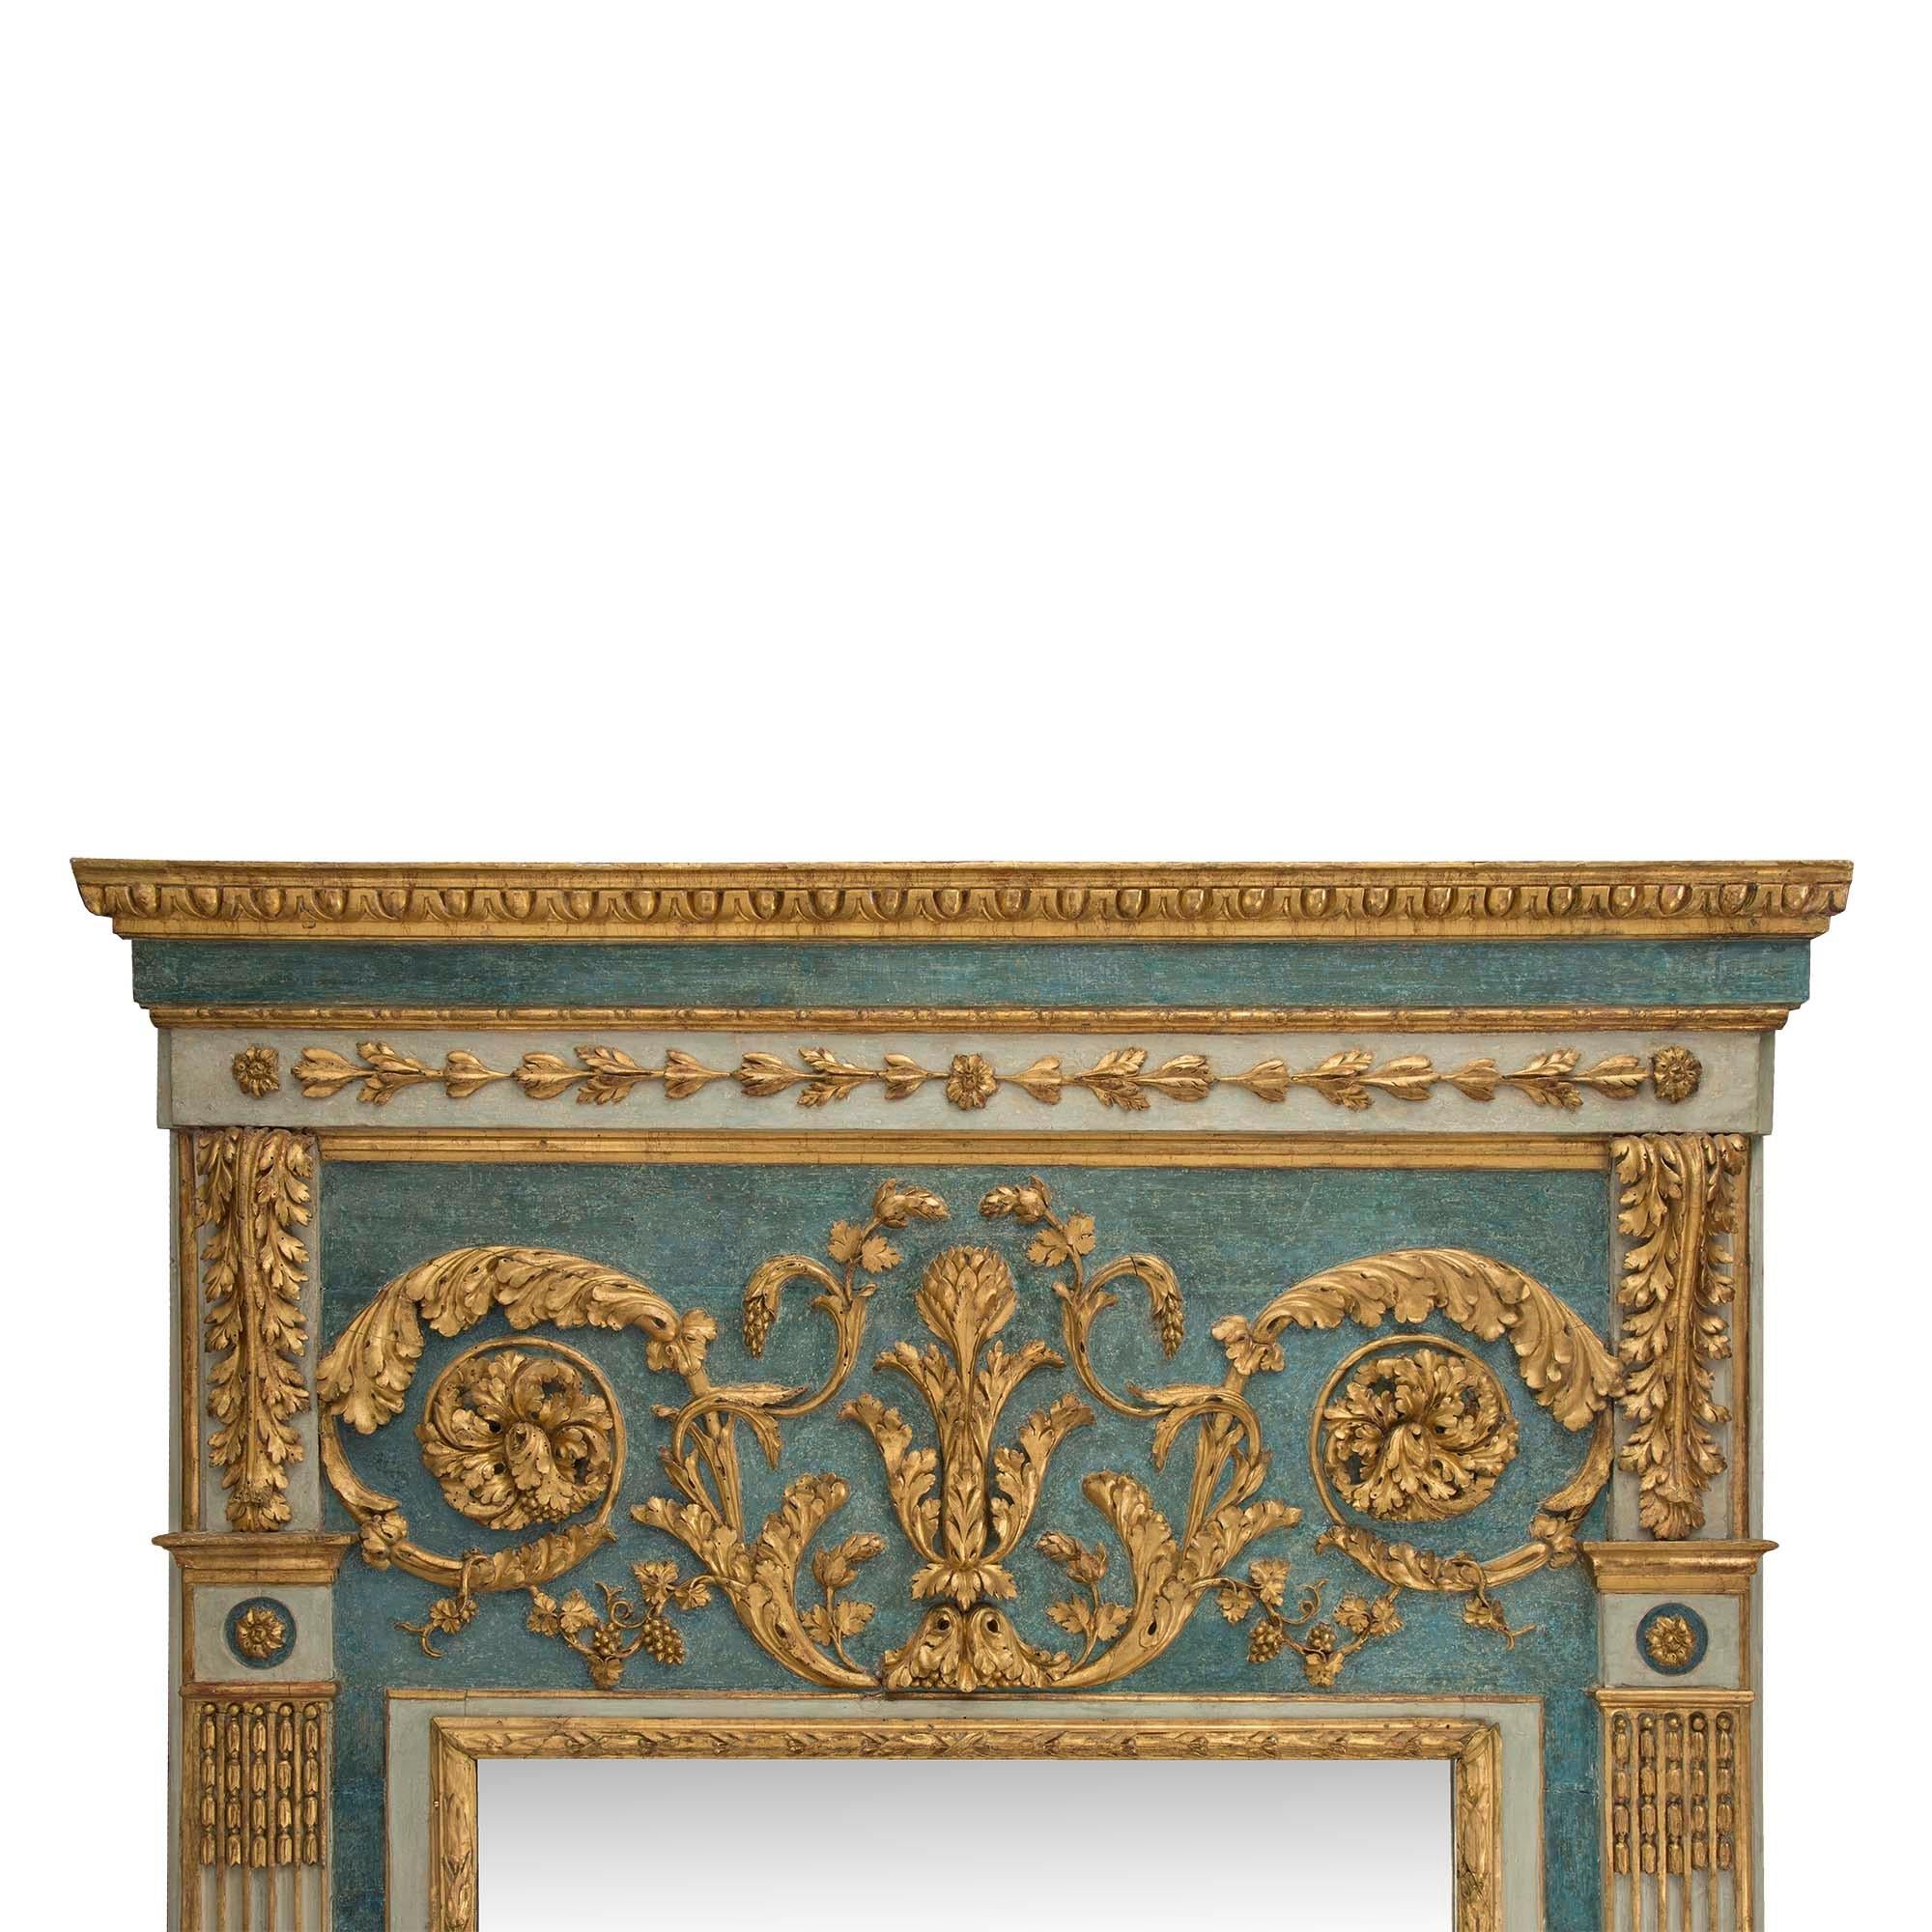 Italian 18th Century Louis XVI Period Giltwood Trumeau In Good Condition For Sale In West Palm Beach, FL